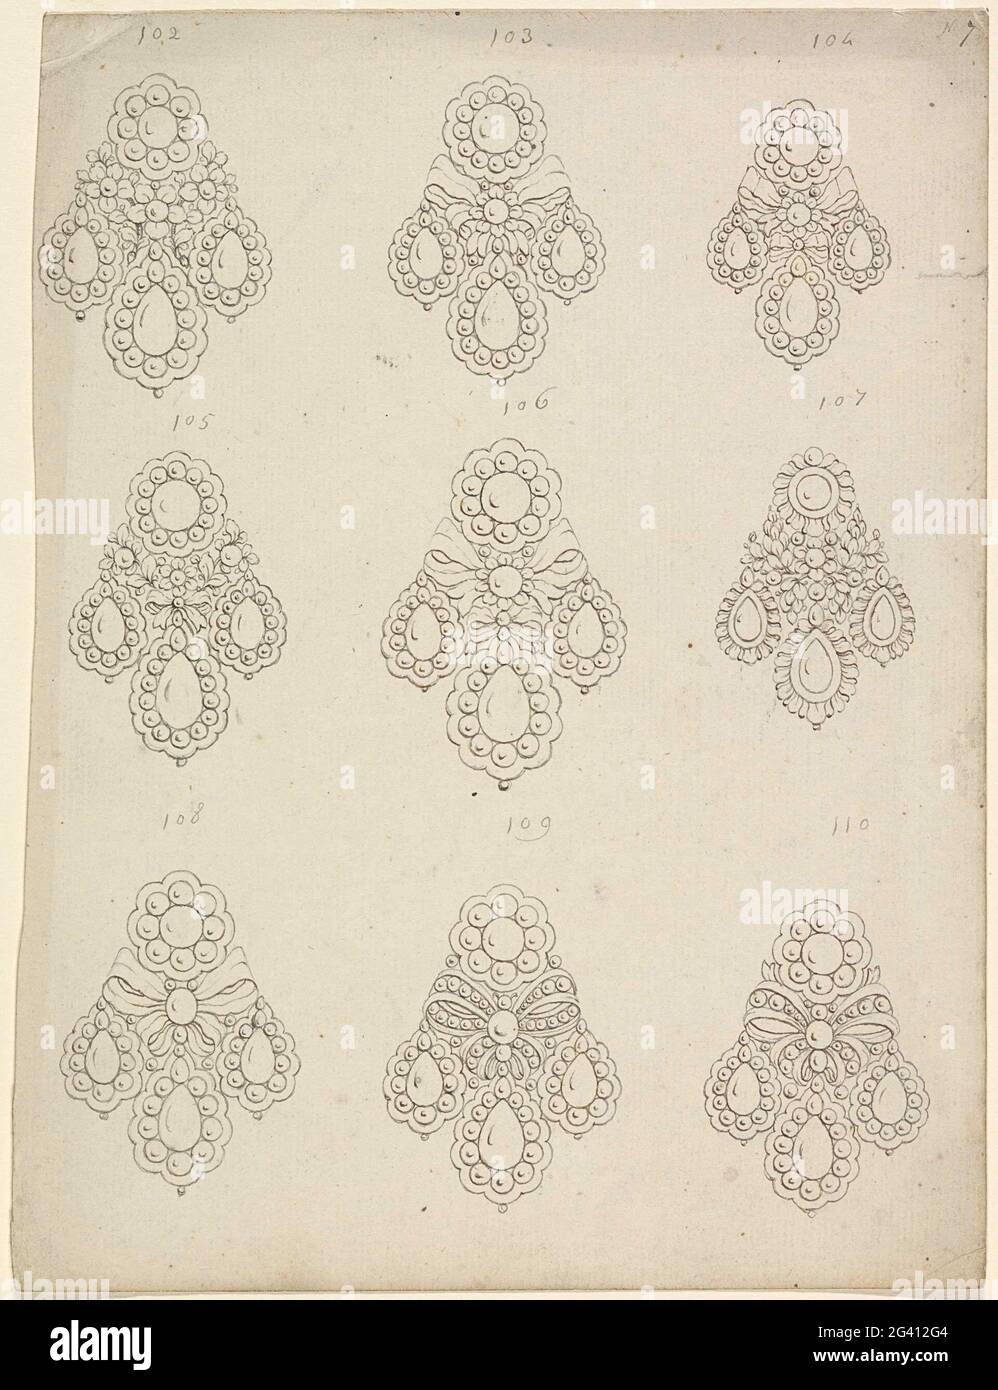 Three Sheets with Designs for Earrings. These numbered sheets probably come from a presentation catalogue. This was a way for a jeweller or travelling salesman to show his clients many variations on the same type of earrings, always modifying a basic design. The pear-shaped stones that recur in many of the designs point to the use of teardrop-shaped pearls. Stock Photo